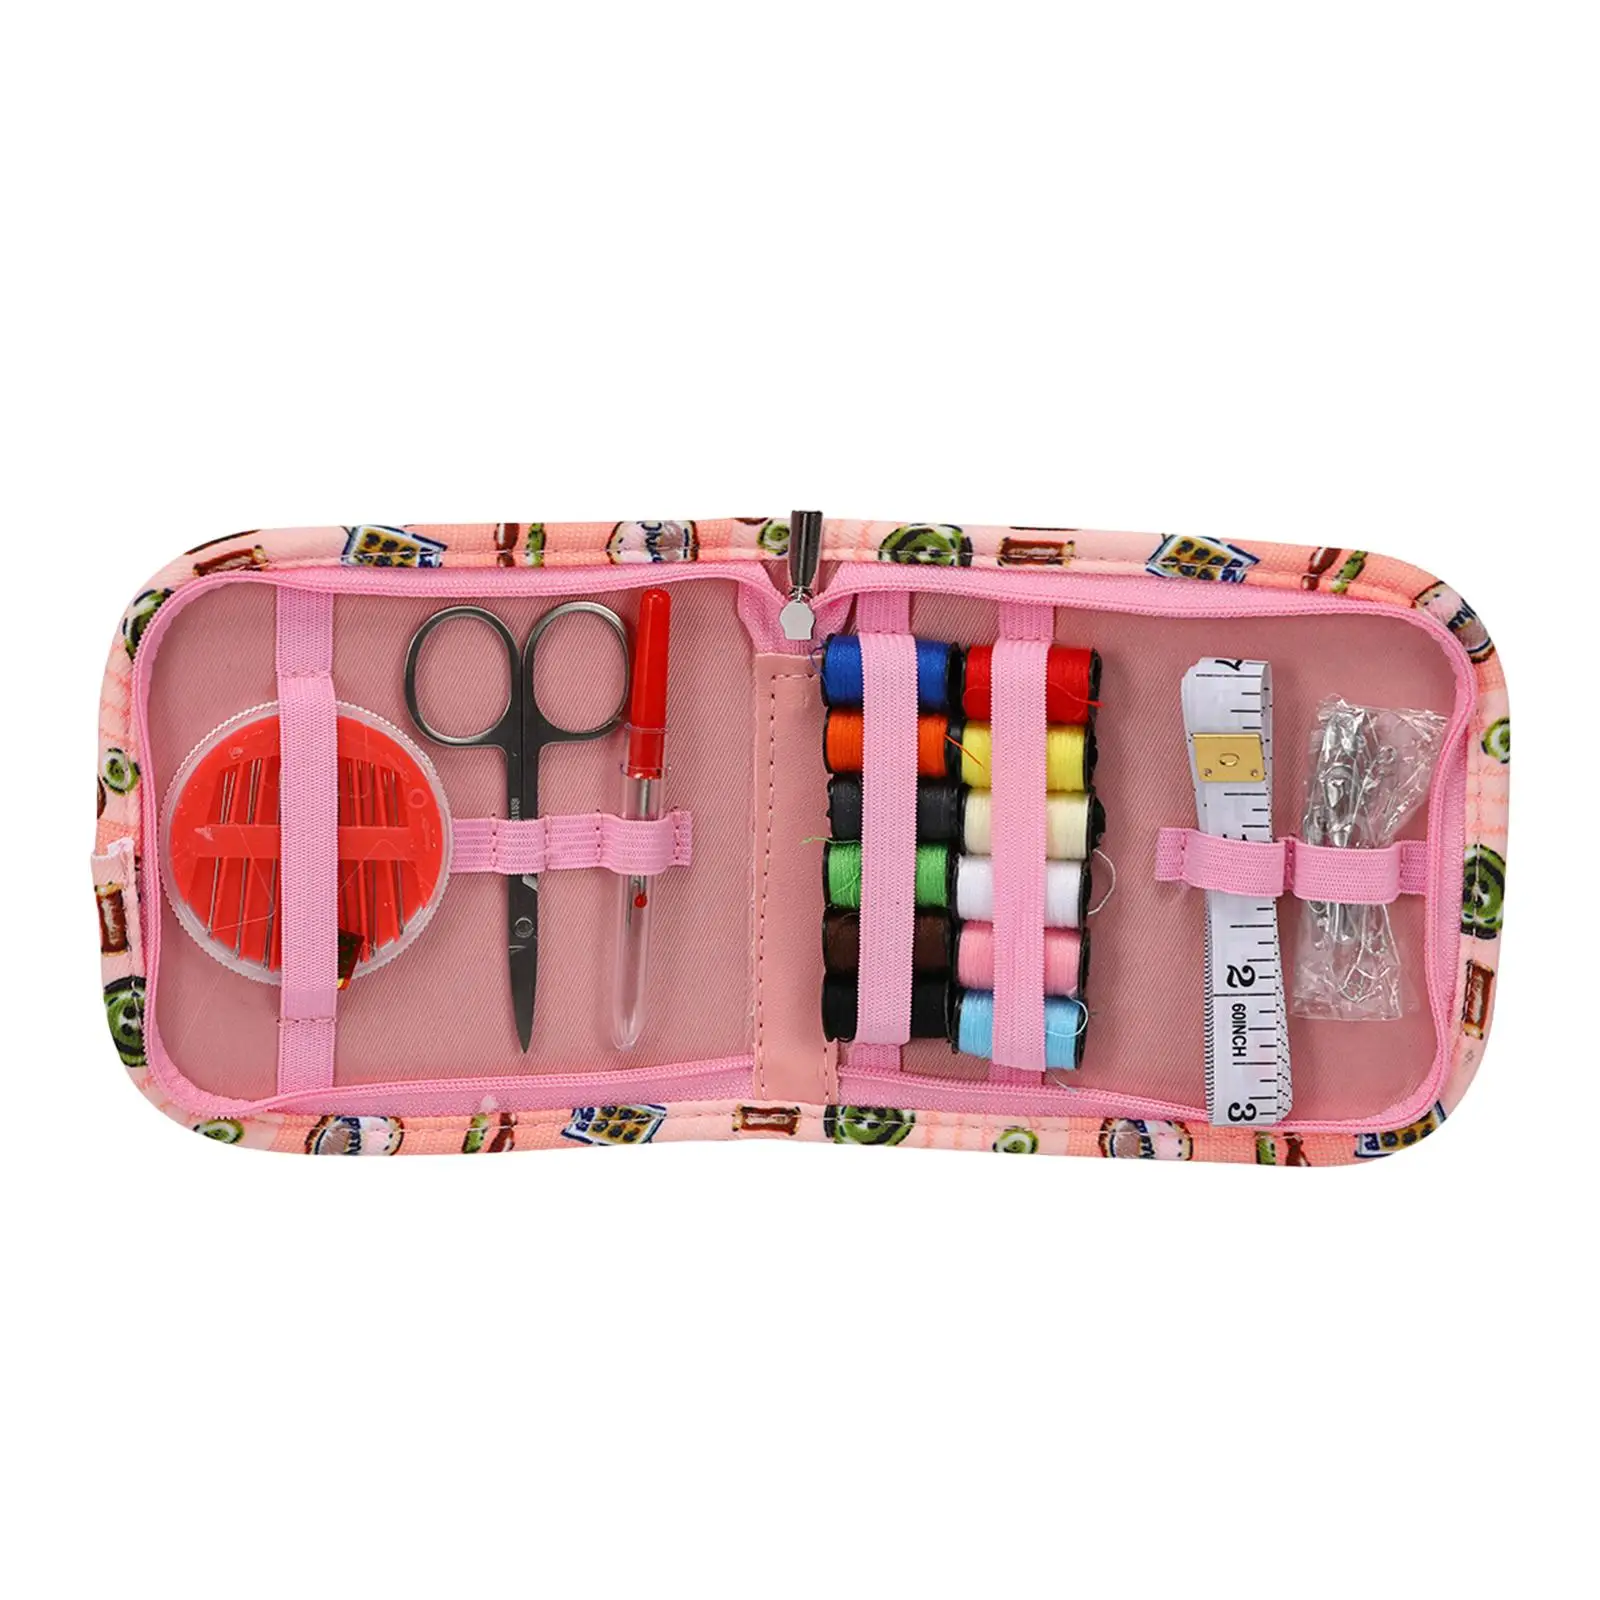 Thread Sewing Needle Set Sewing Tools Set Multicolor Thread with Storage Bag Sewing Supplies Tape Measure Sewing Kits